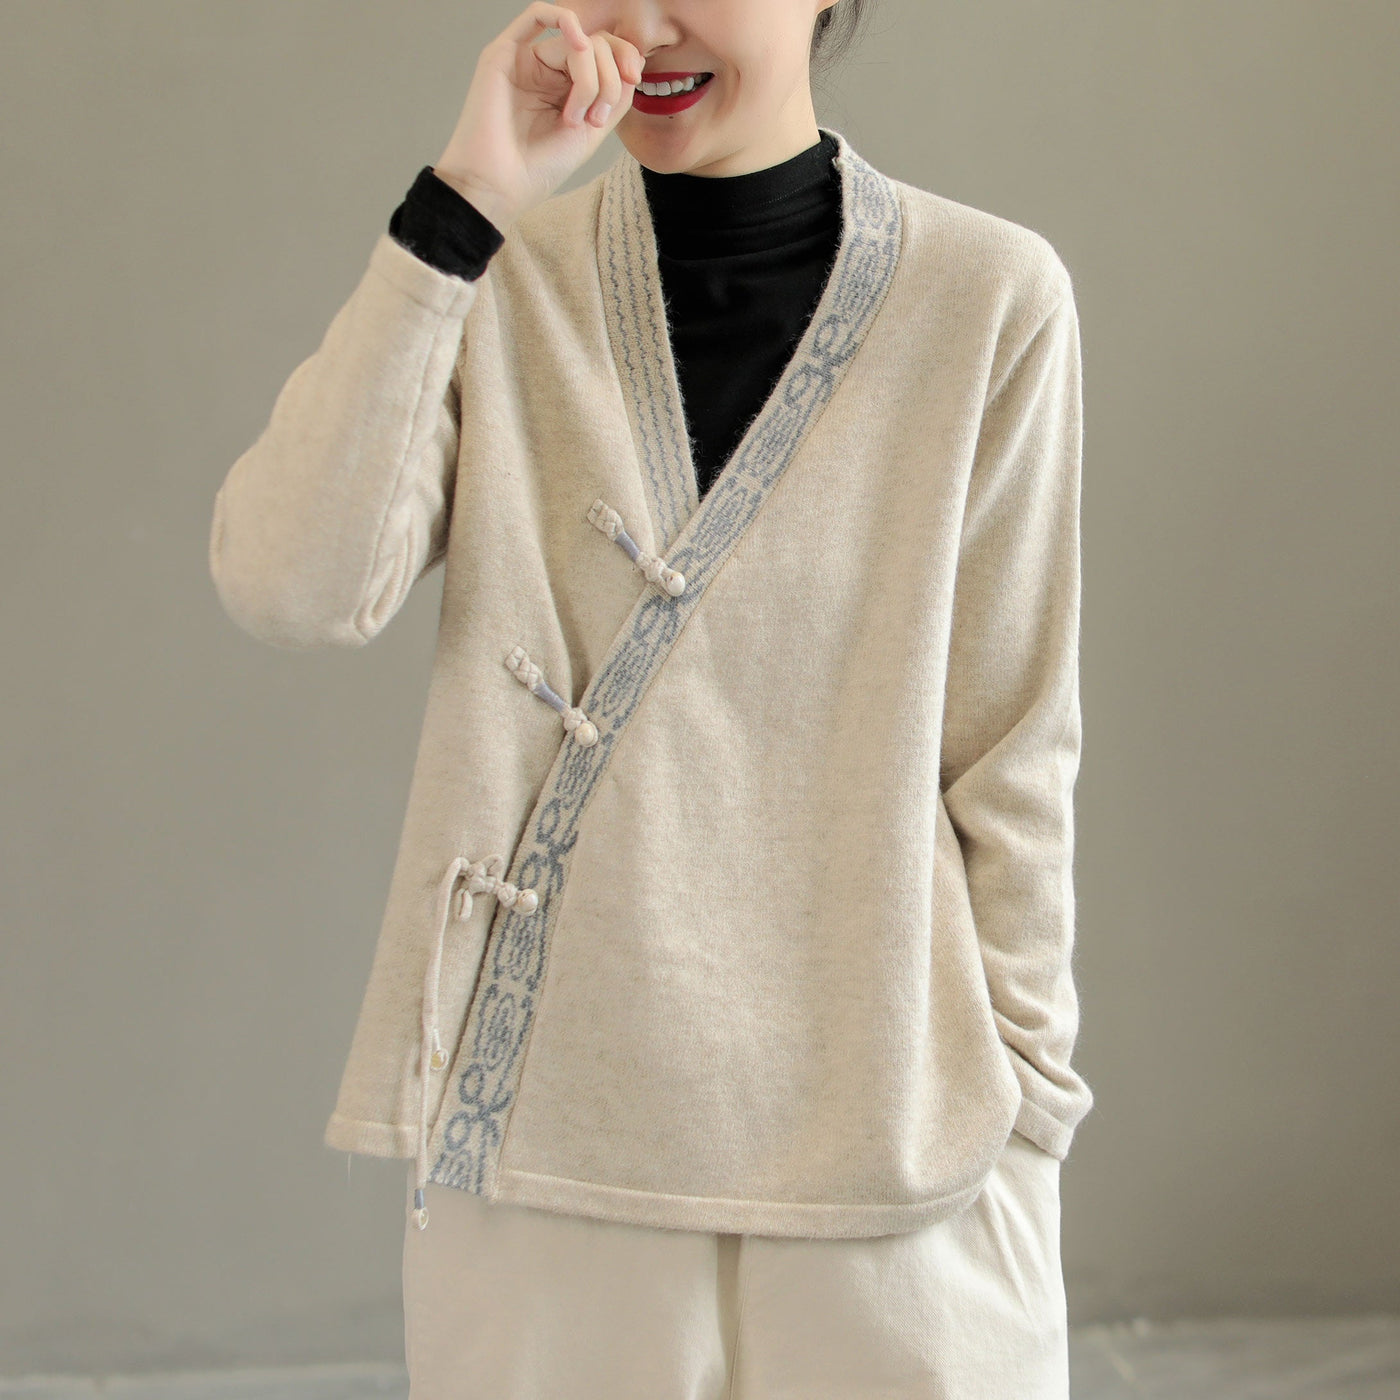 Autumn Retro Irregular Knitted Jacket For Women Sep 2022 New Arrival One Size Beige 